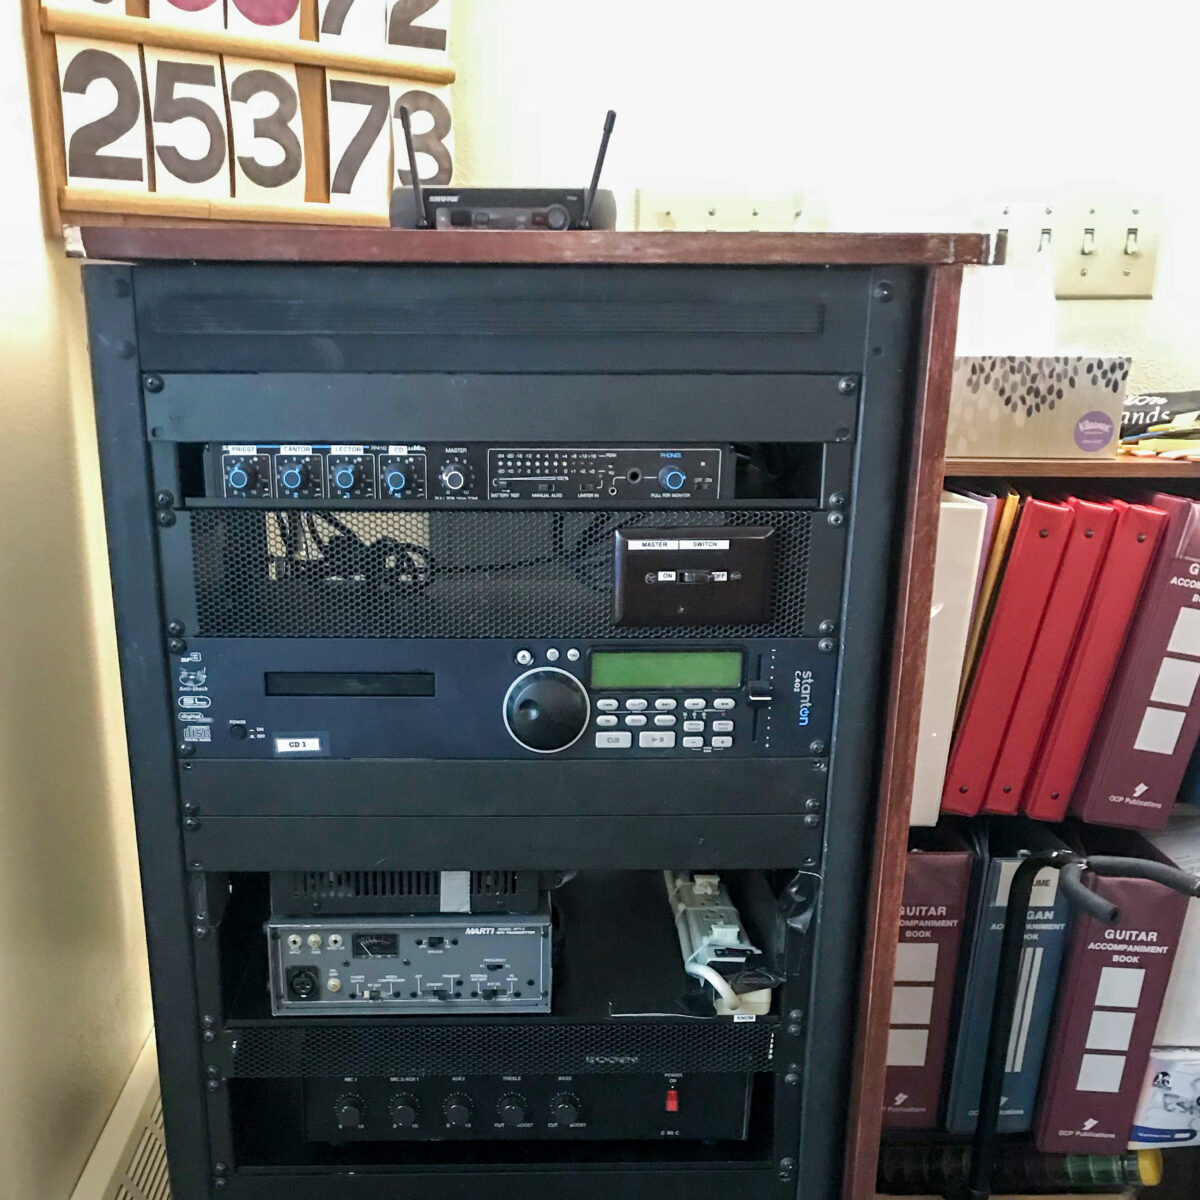 In the corner of a Catholic church, a rack of broadcasting hardware, such as a transmitter and CD player.